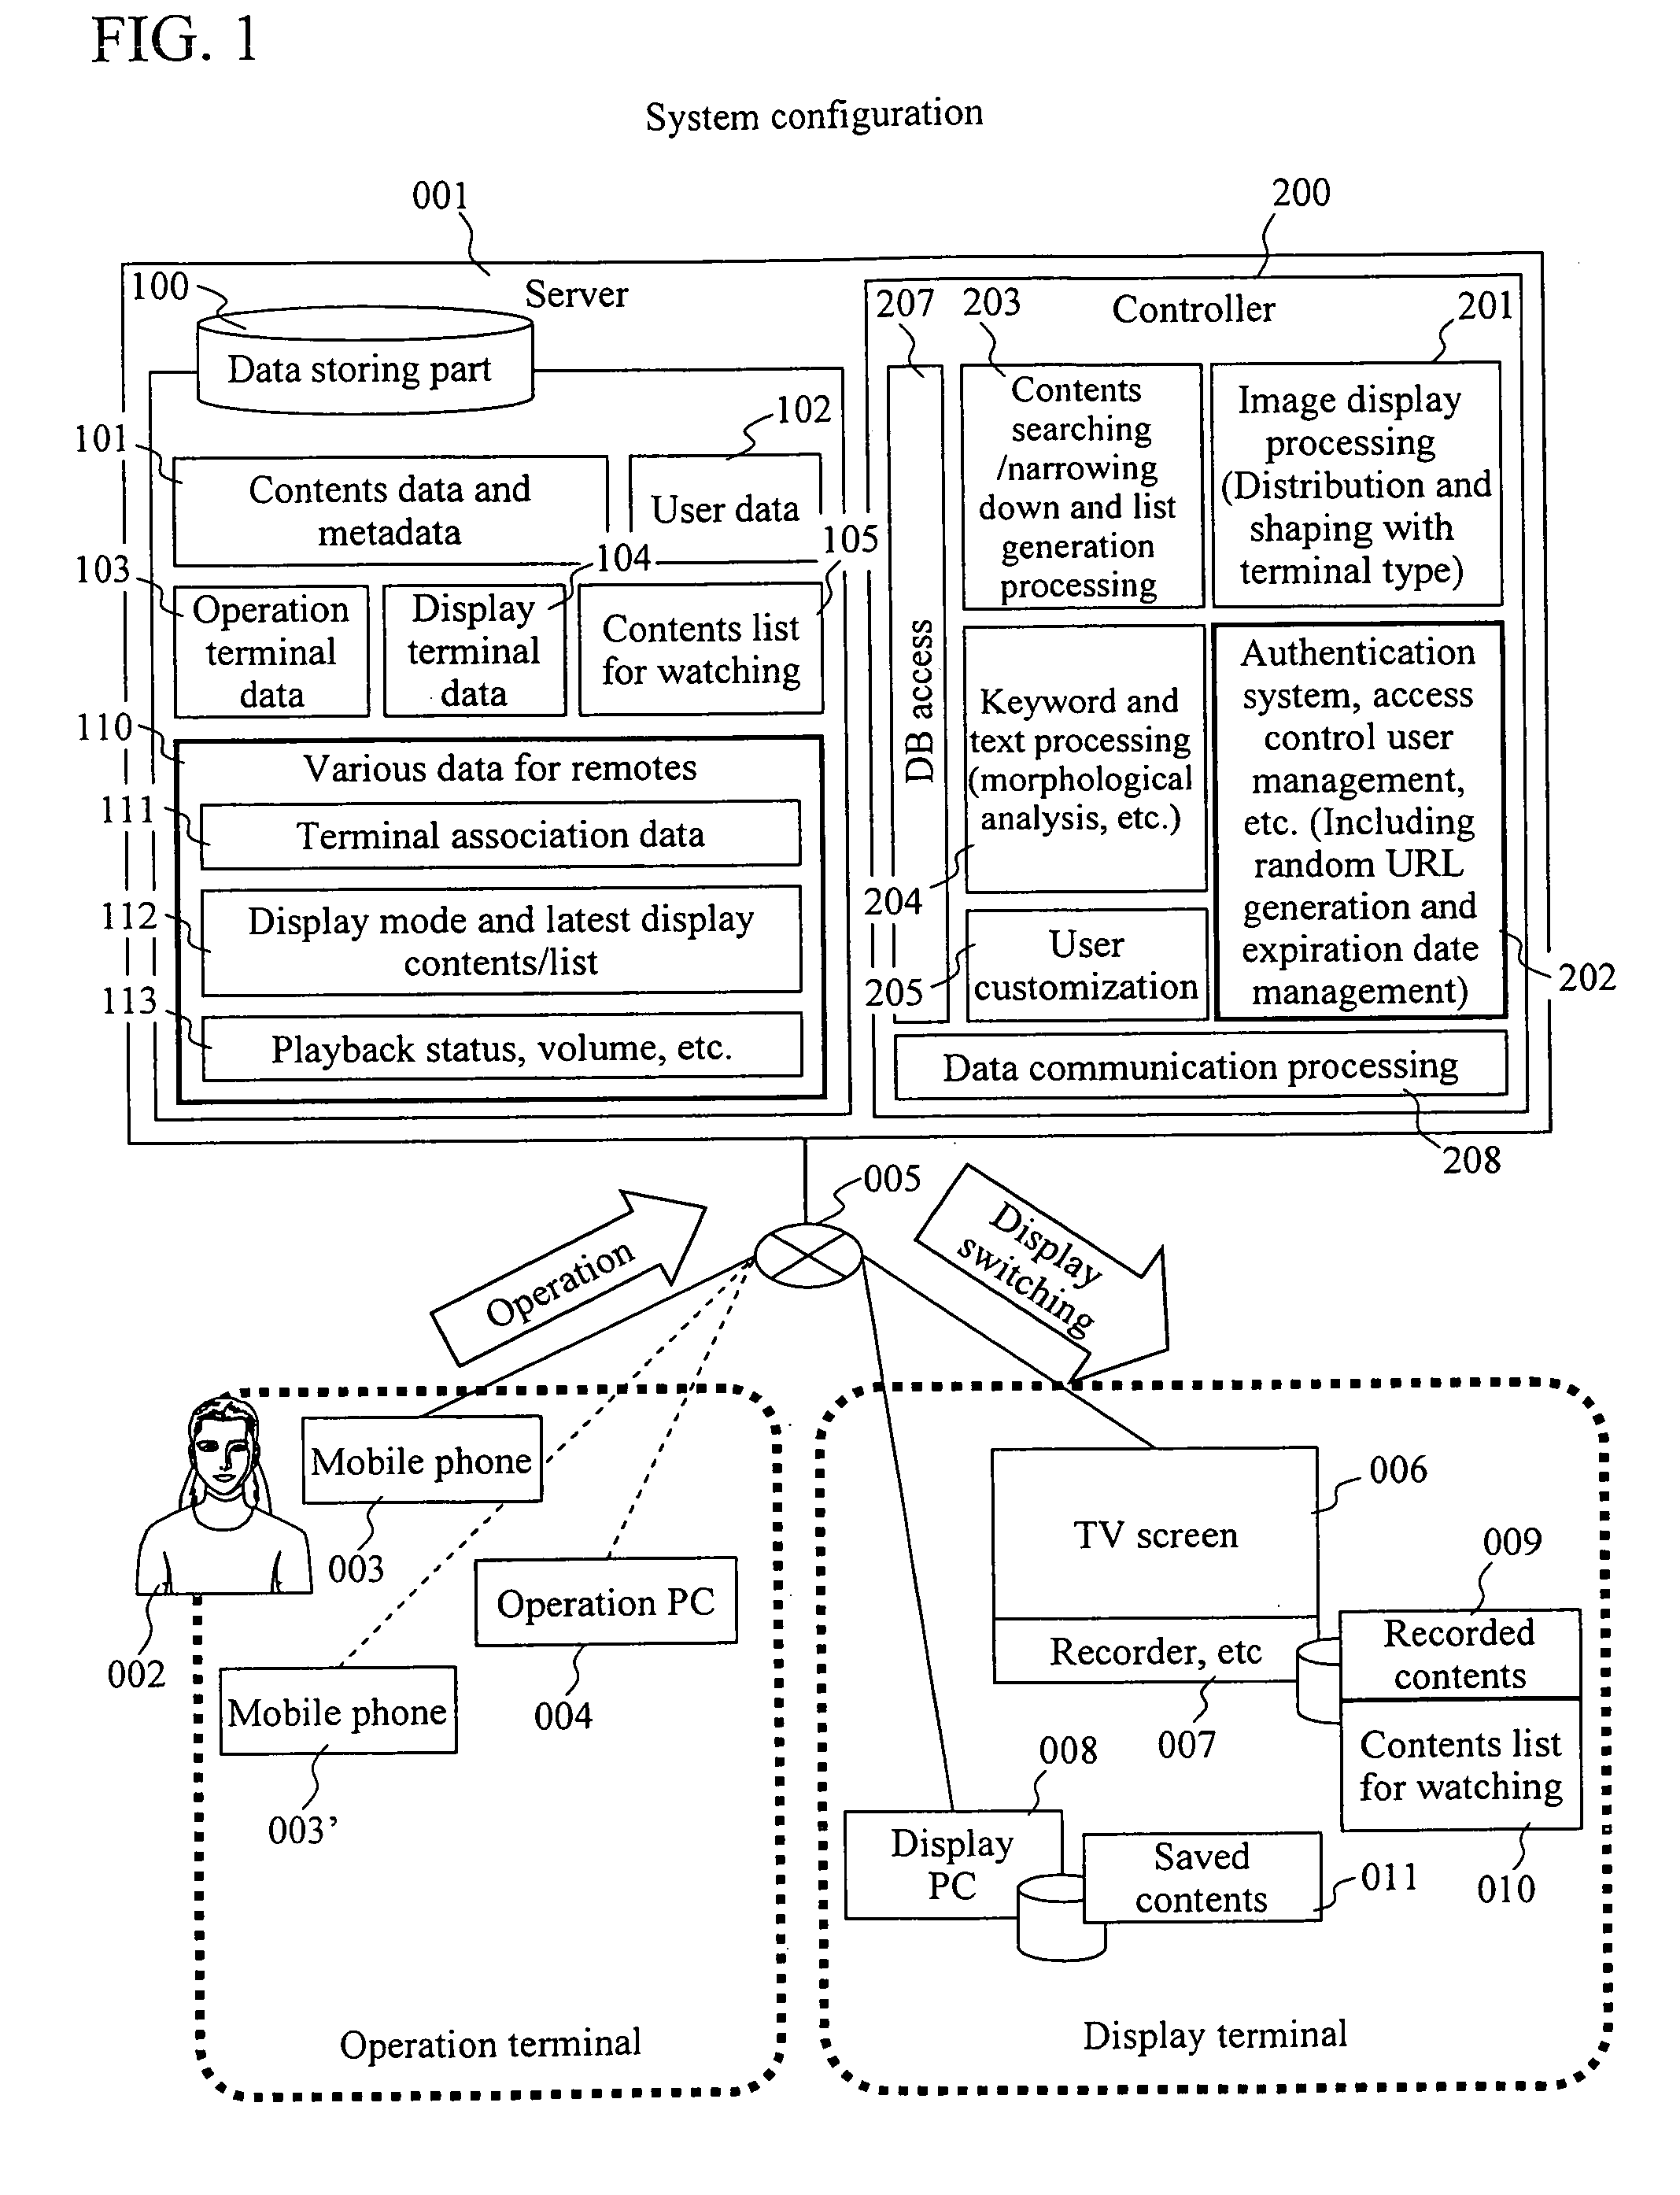 Server for displaying contents